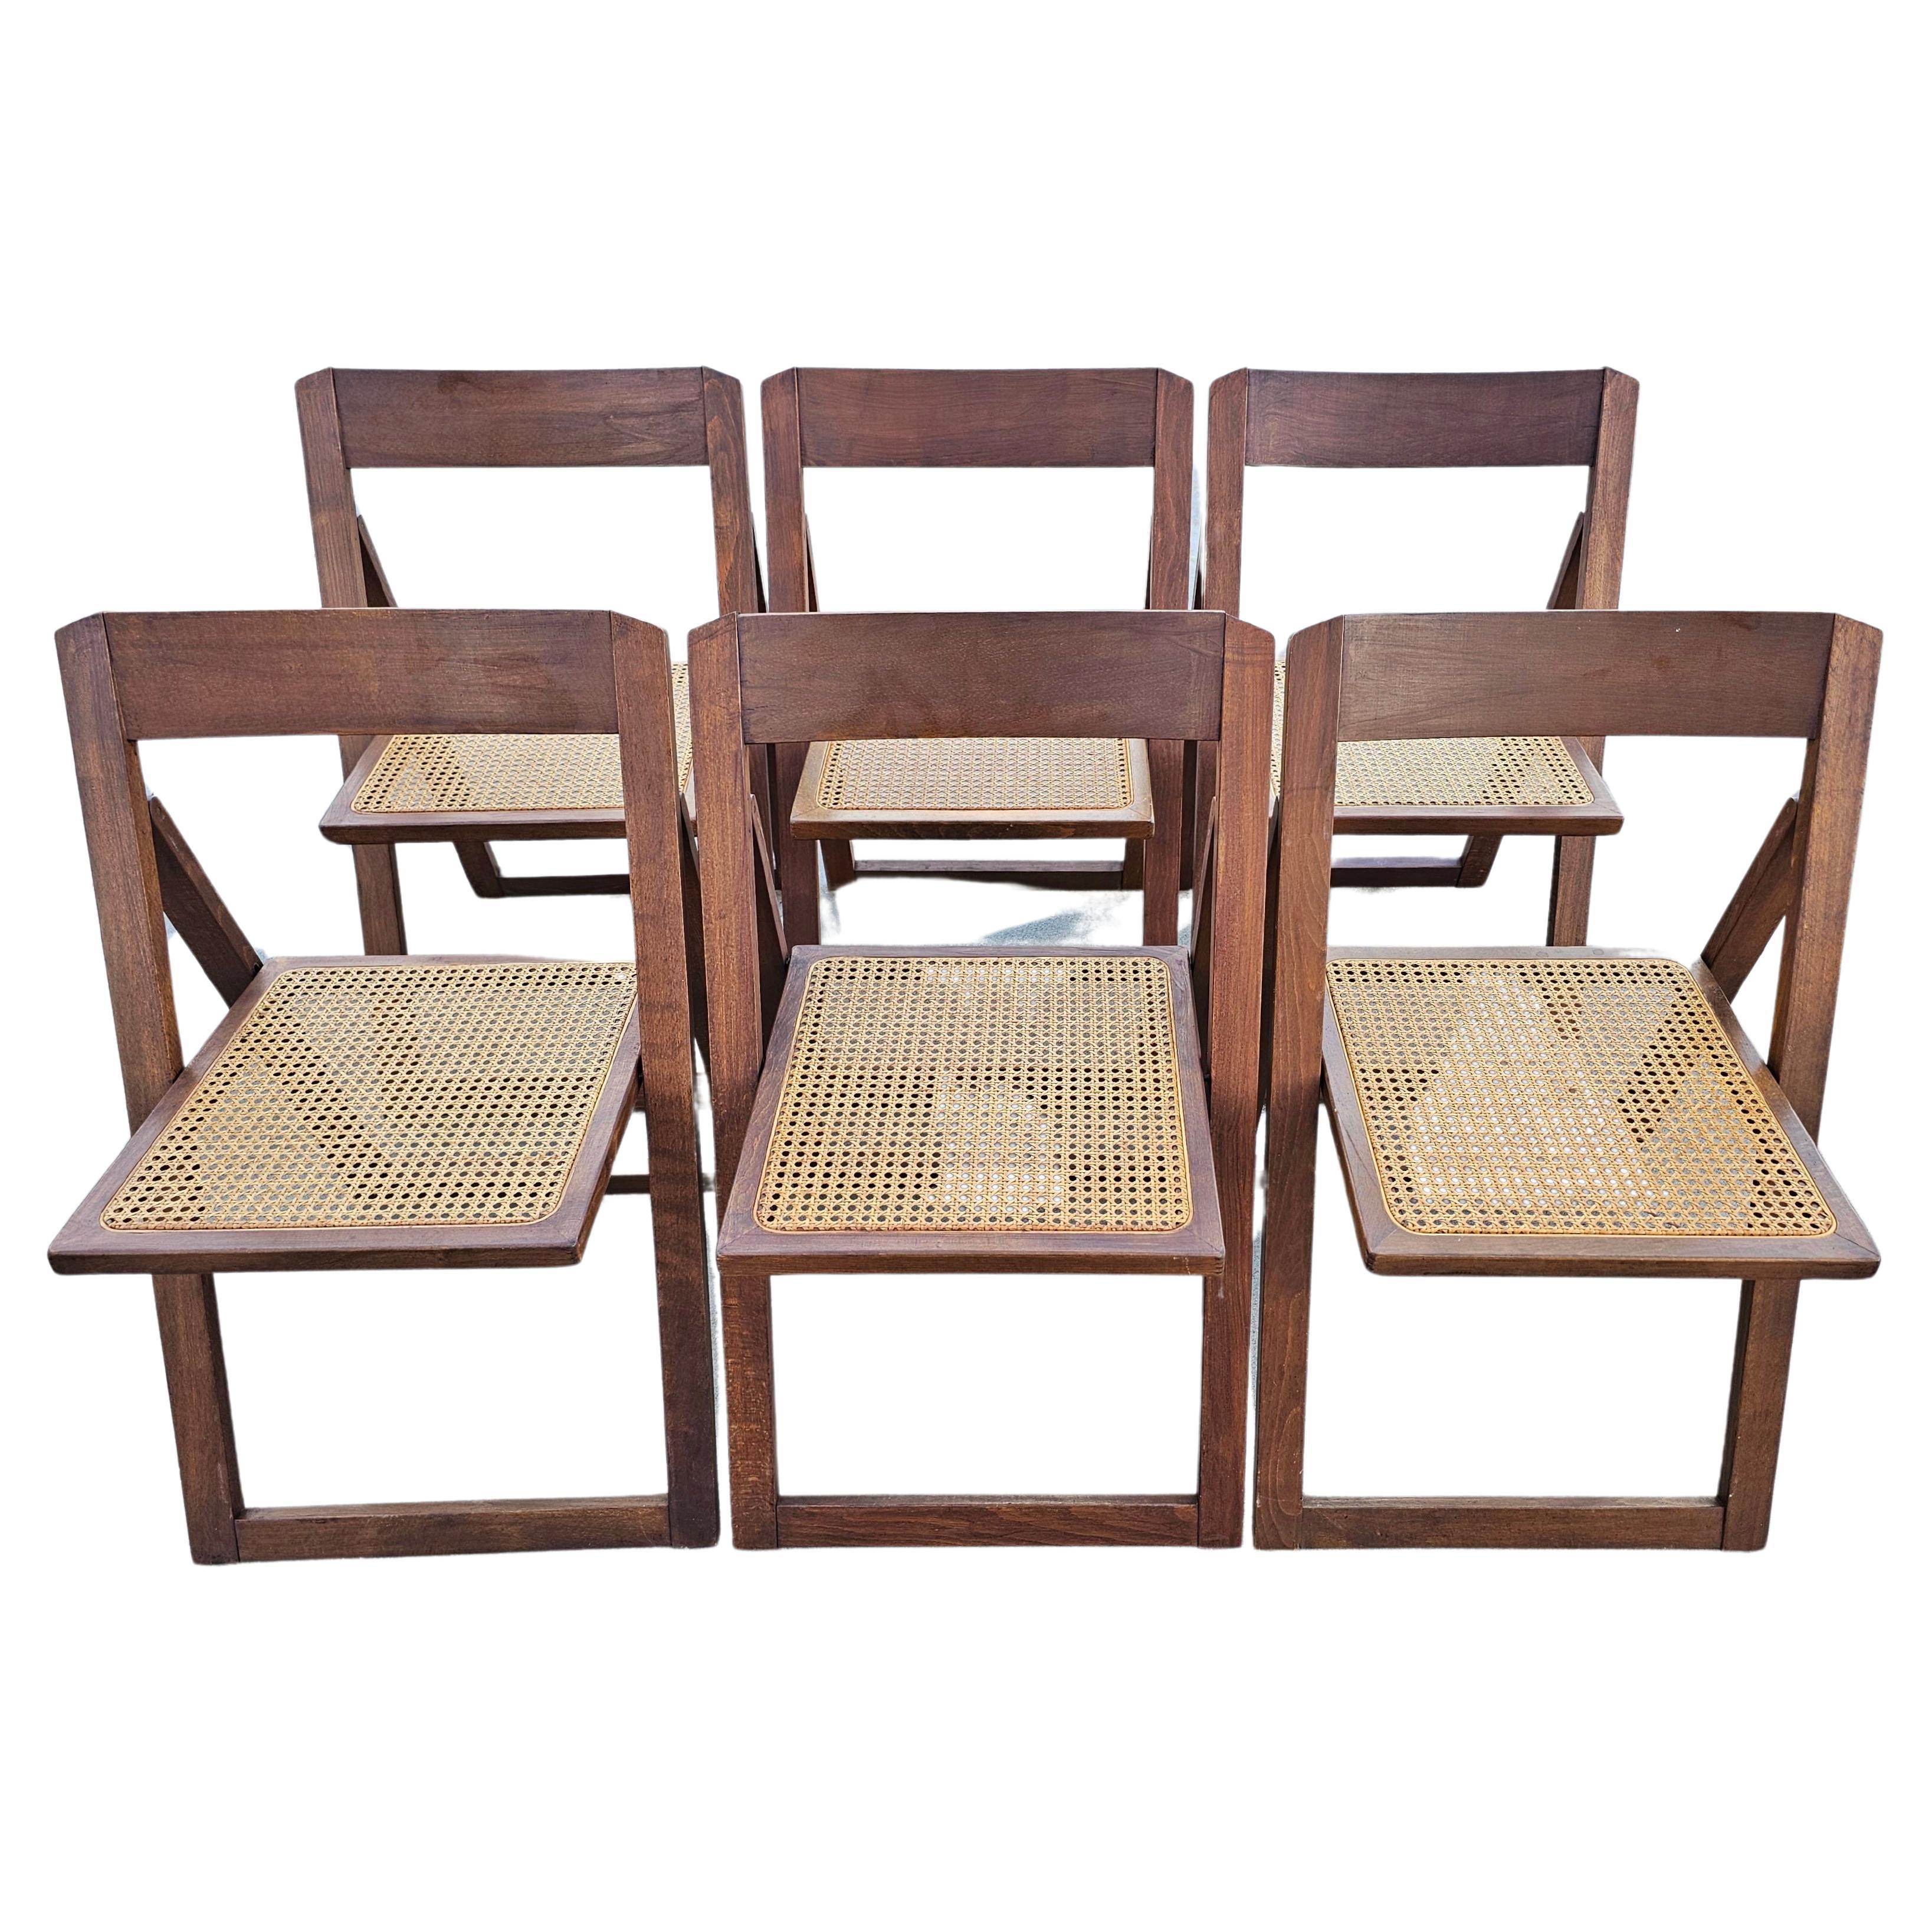 Set of 6 Folding Chairs with Cane Seats in style of Aldo Jacober, Italy 1980s For Sale